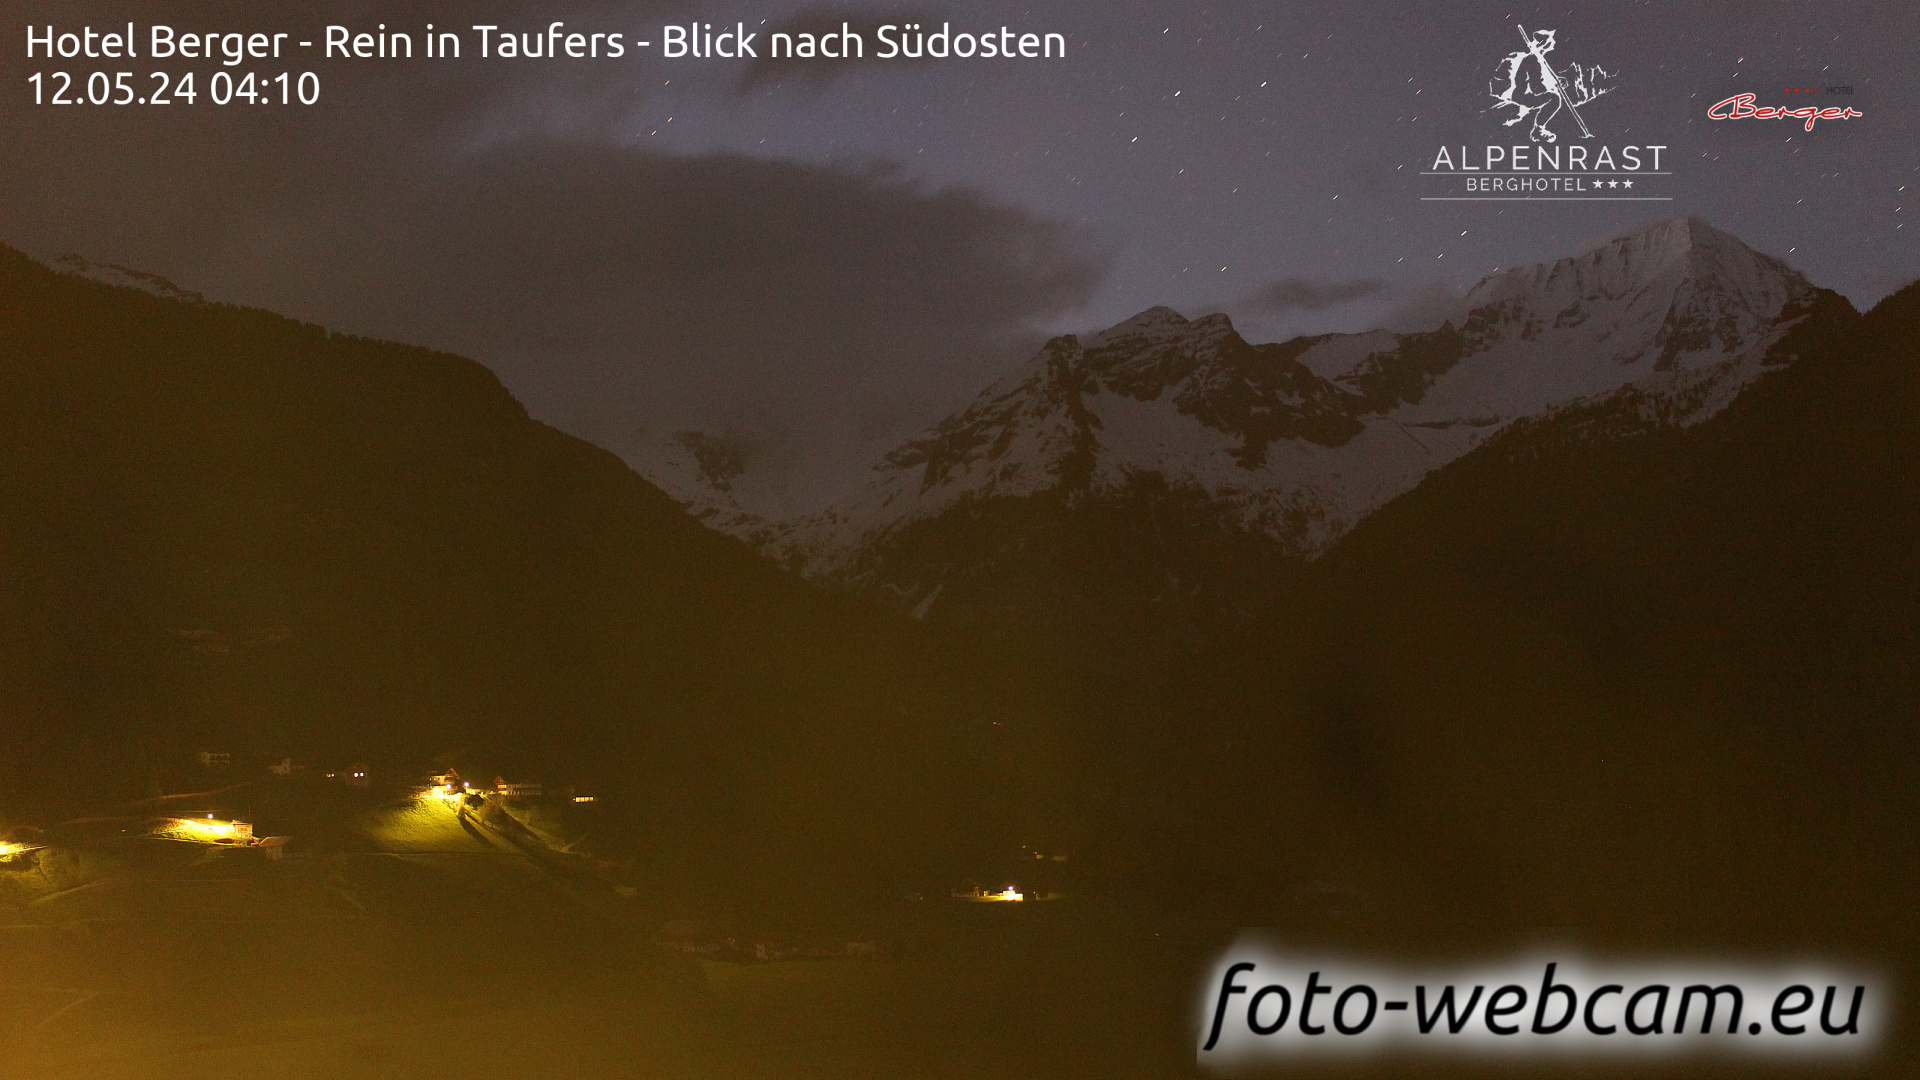 Rein in Taufers Do. 04:11